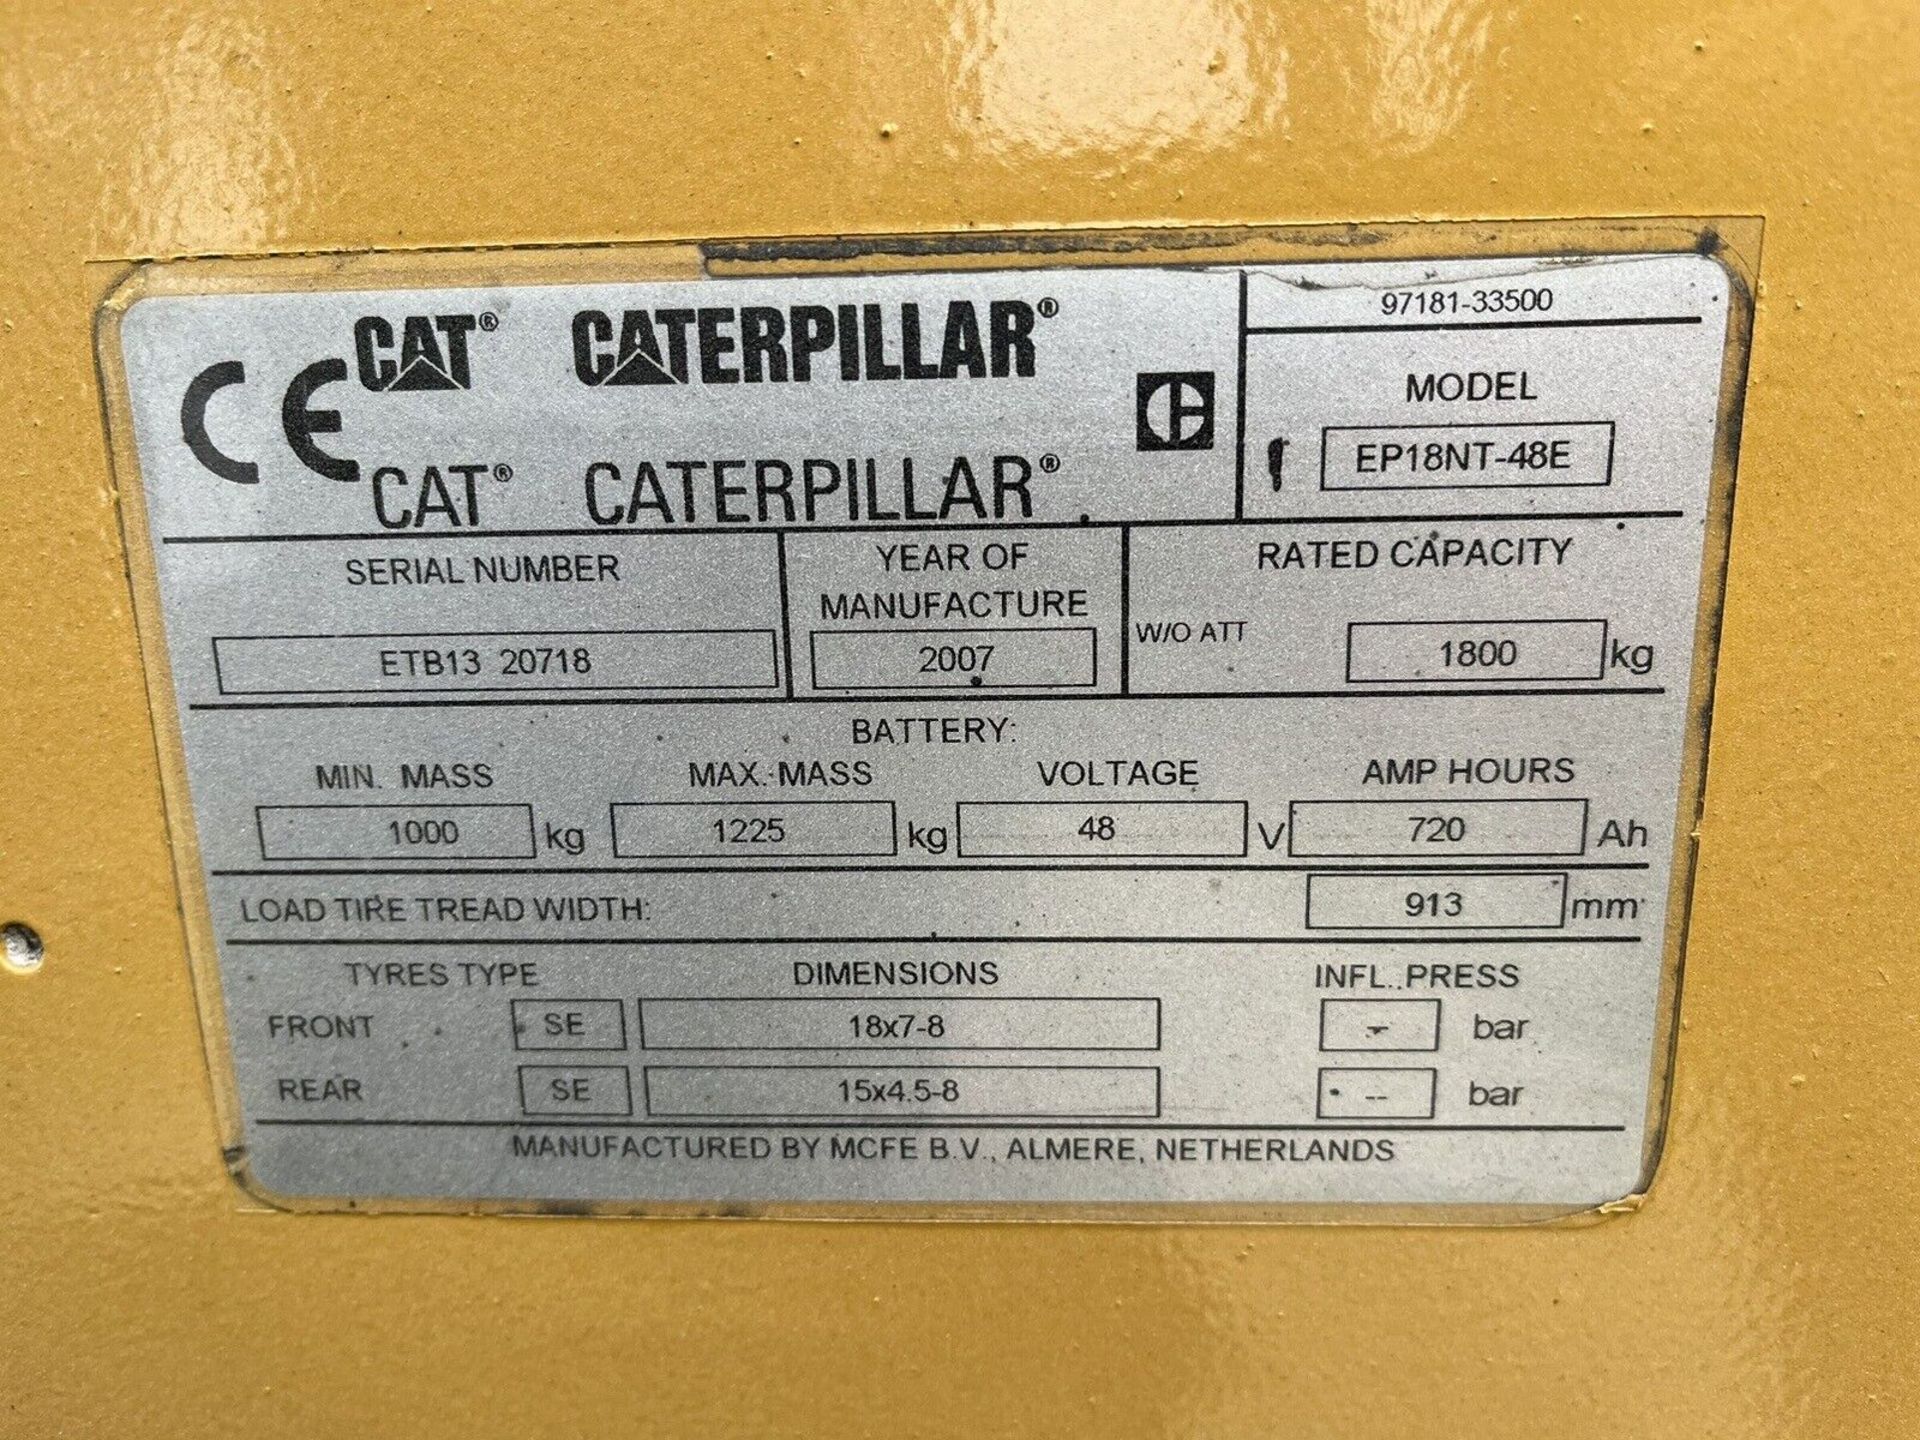 CATERPILLAR 1.8 Electric Forklift Truck (Container Spec) - Image 2 of 4